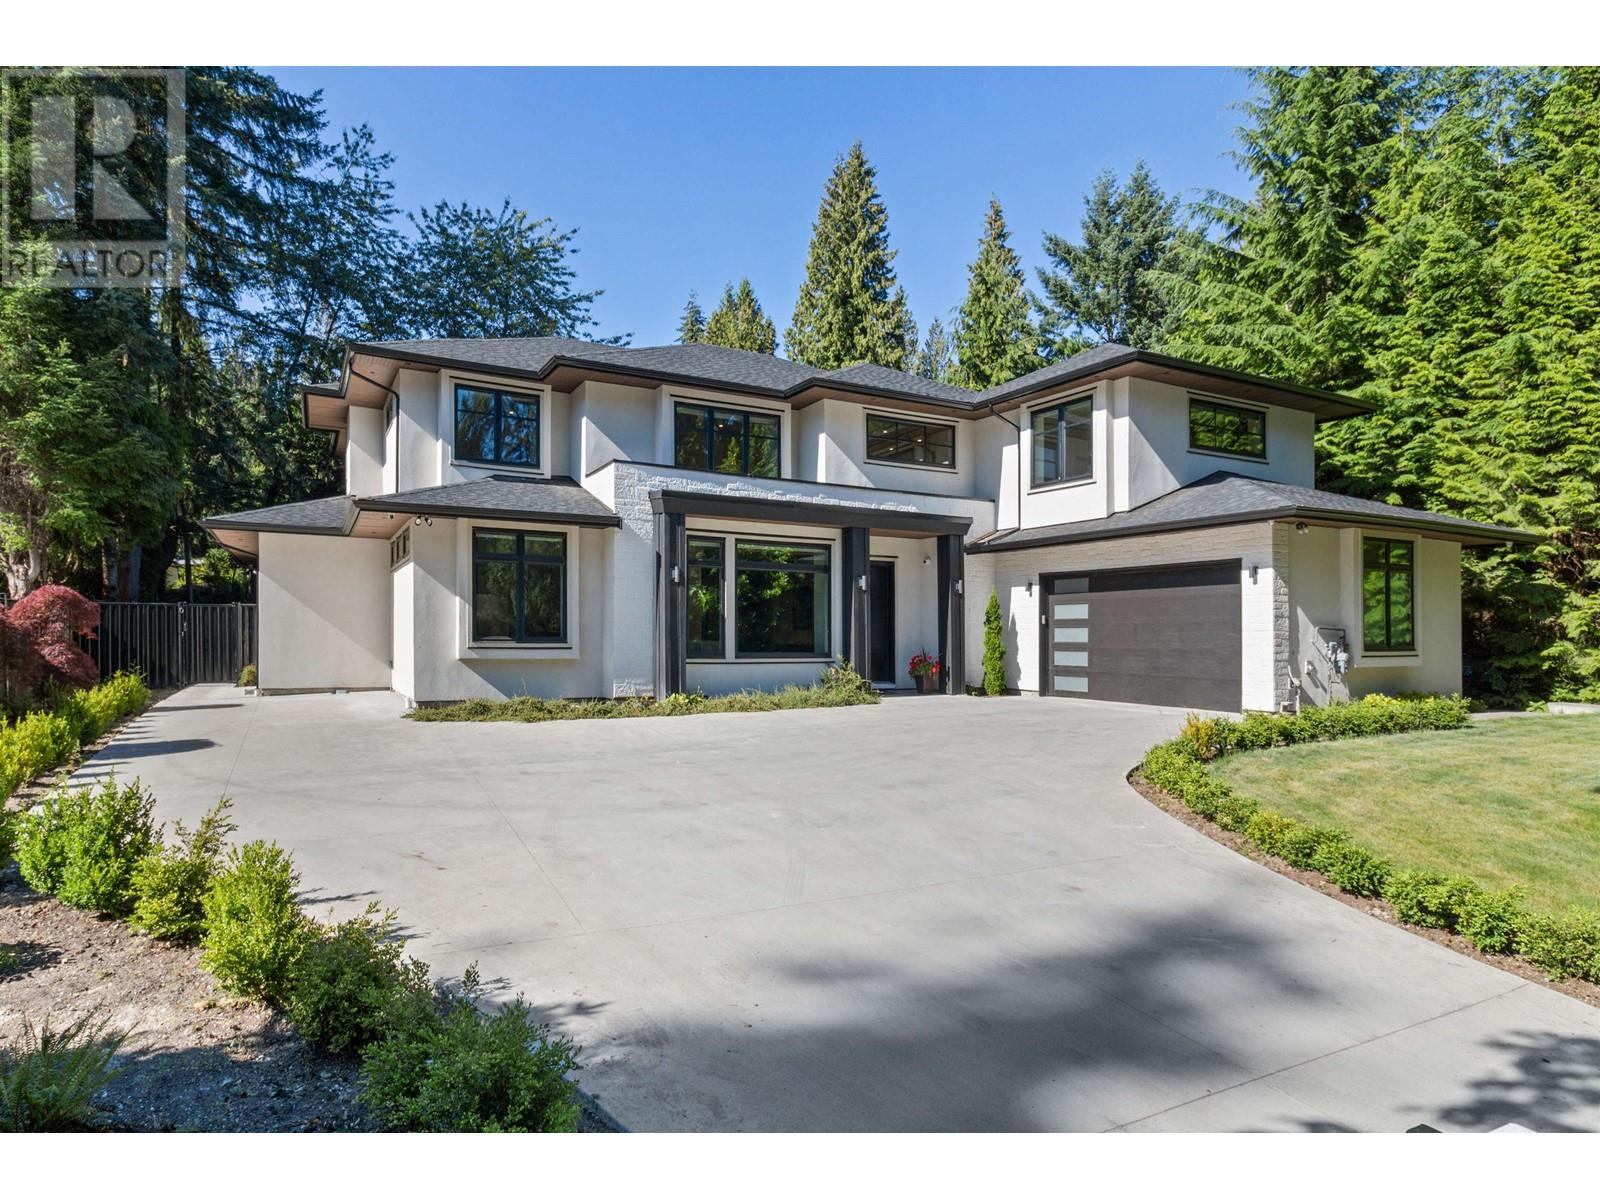 565 MATHERS AVENUE, west vancouver, British Columbia